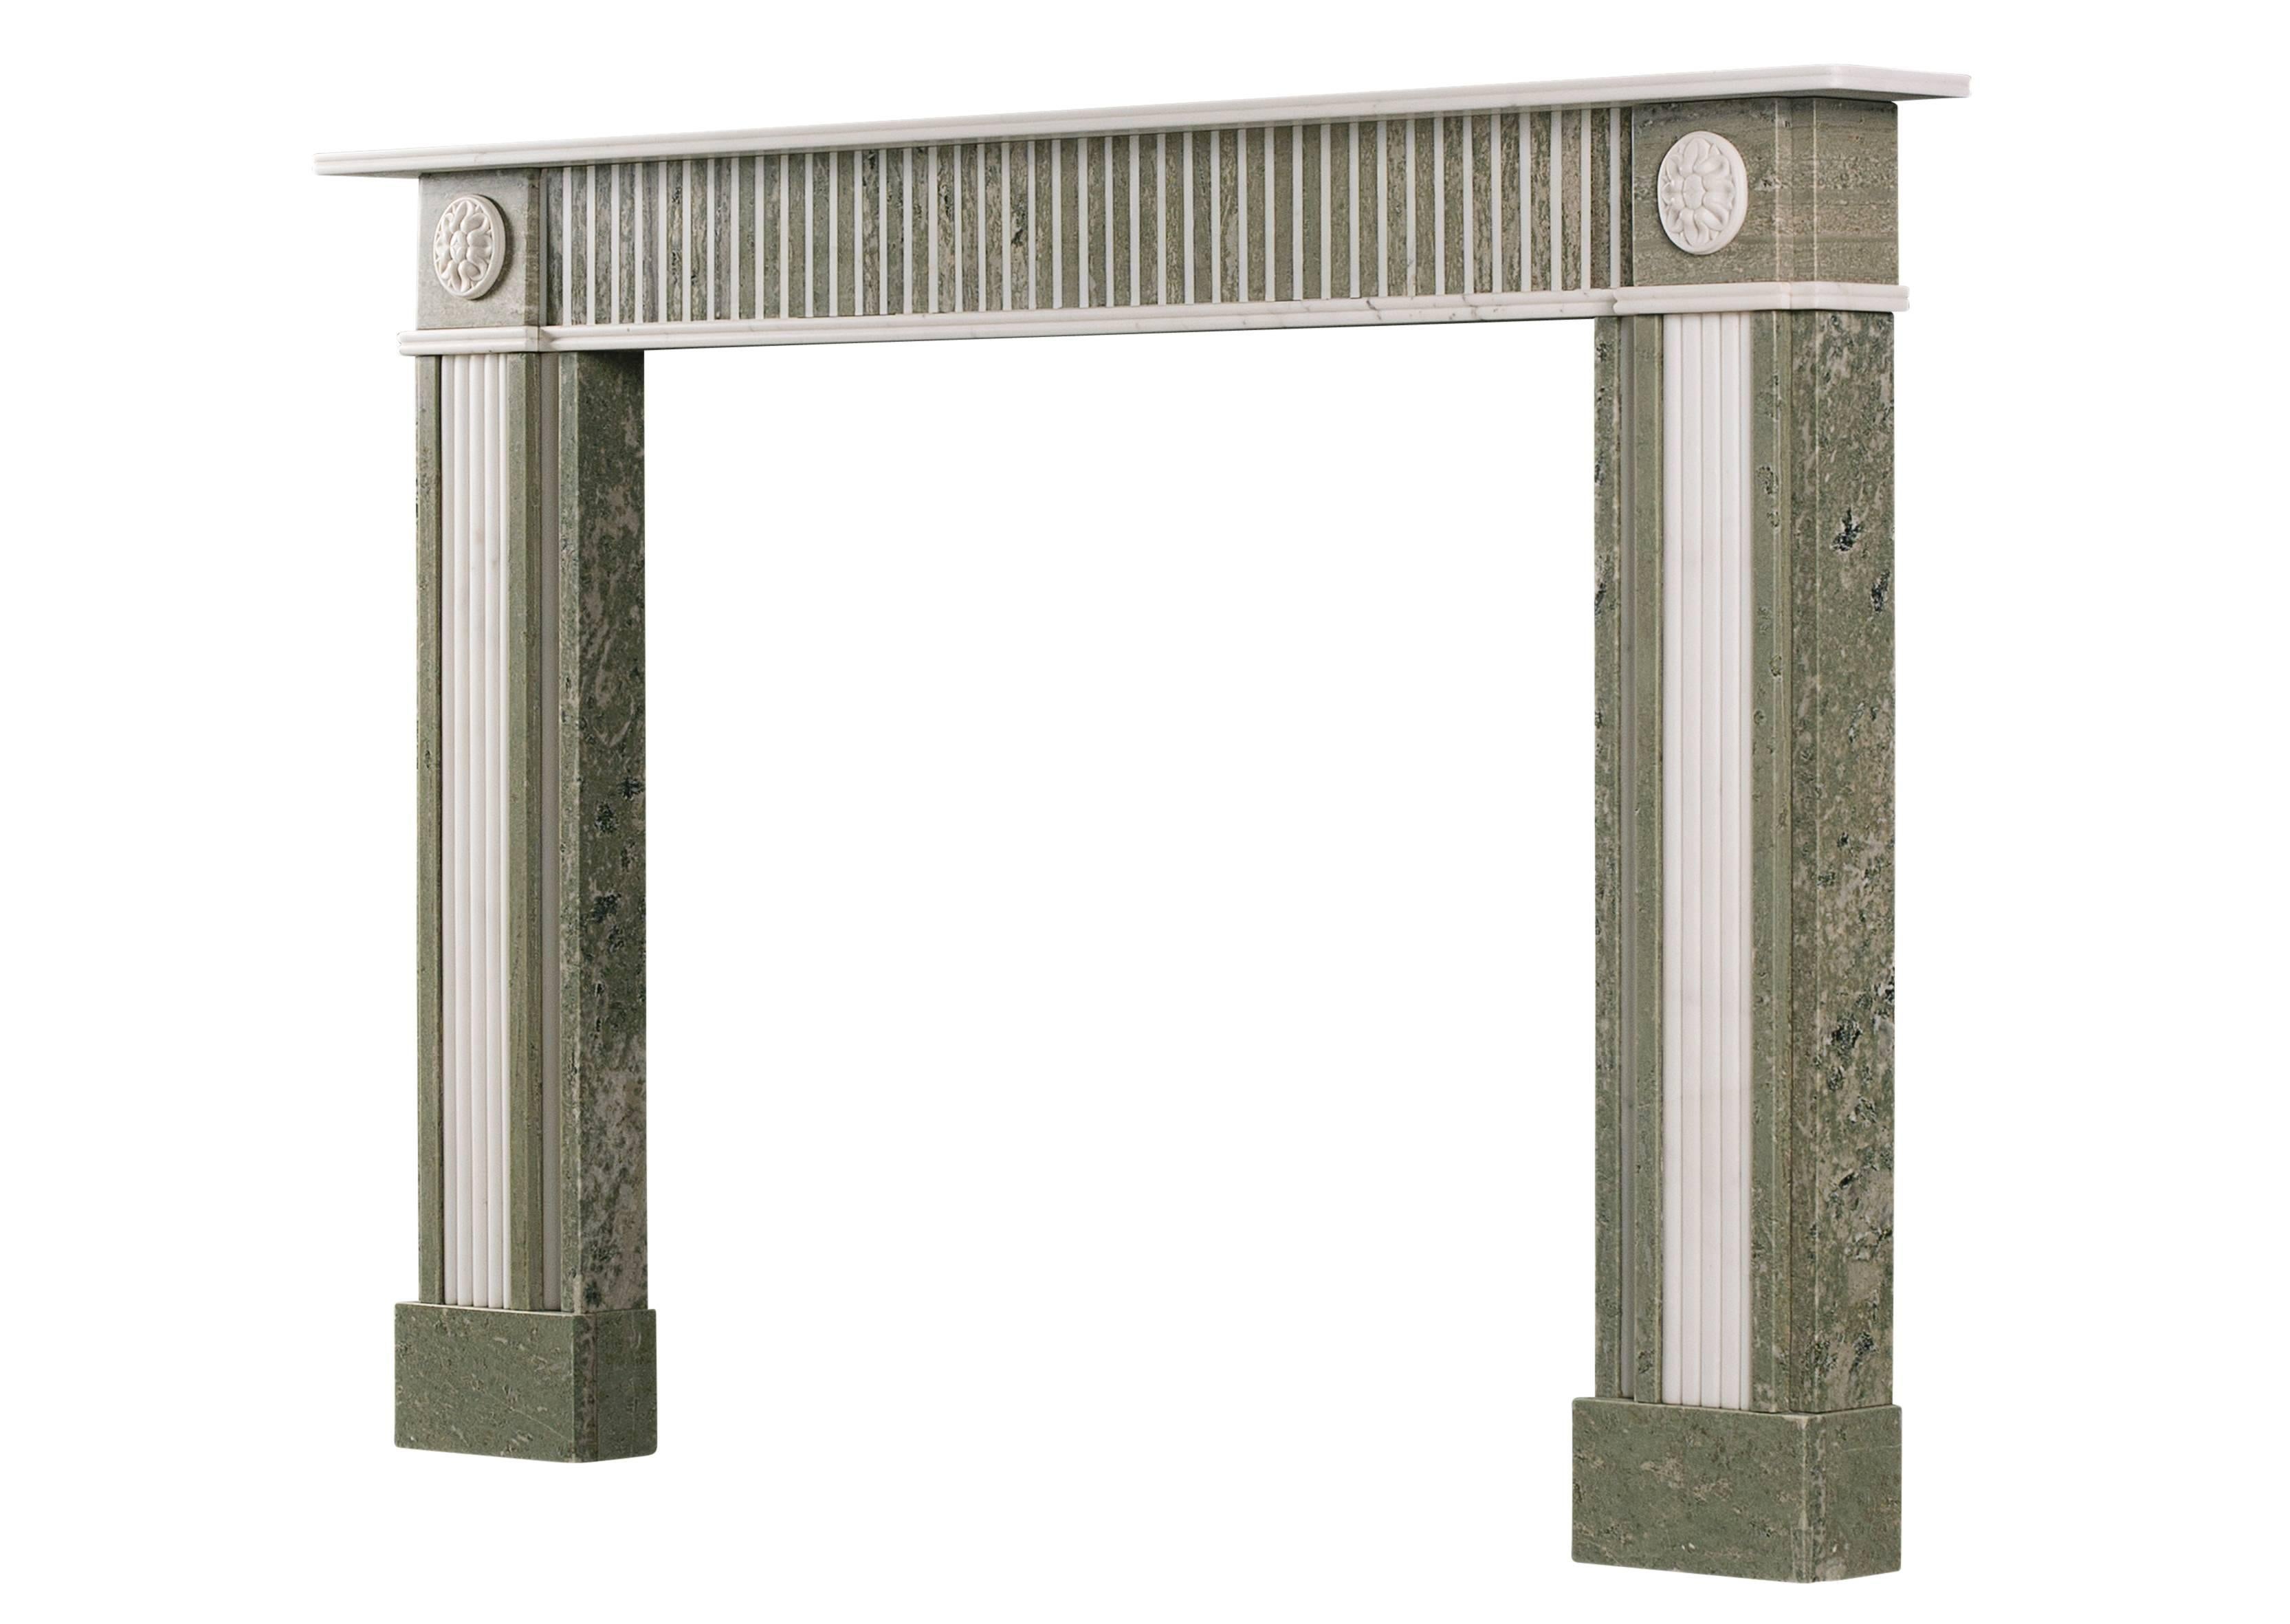 A Regency style fireplace in Swedish green marble with white marble inlay. The jambs with convex flutes, surmounted by carved oval paterae. The frieze with full flutes, contrasting the two marbles. Reeded shelf above. English, early 20th